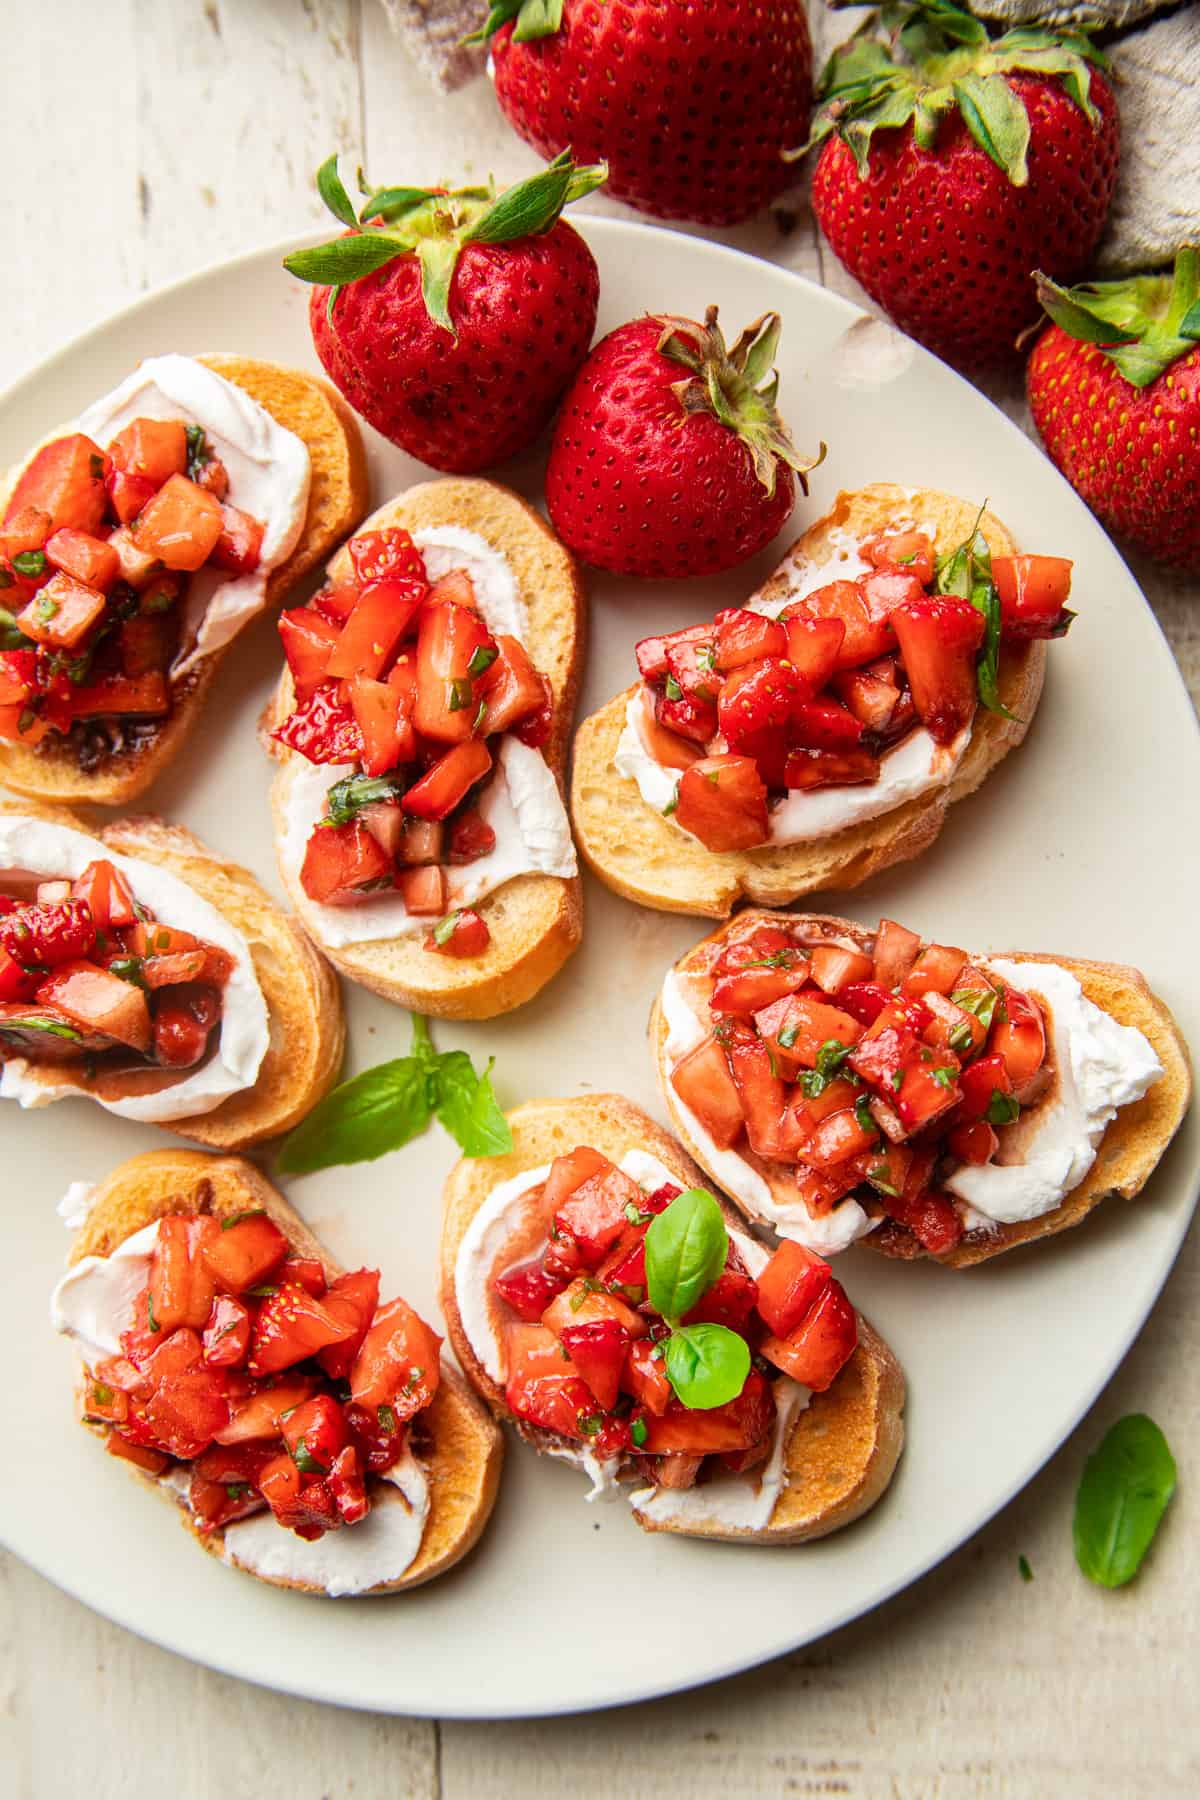 Fresh strawberries and baguette slices topped with Strawberry Bruschetta on a plate.